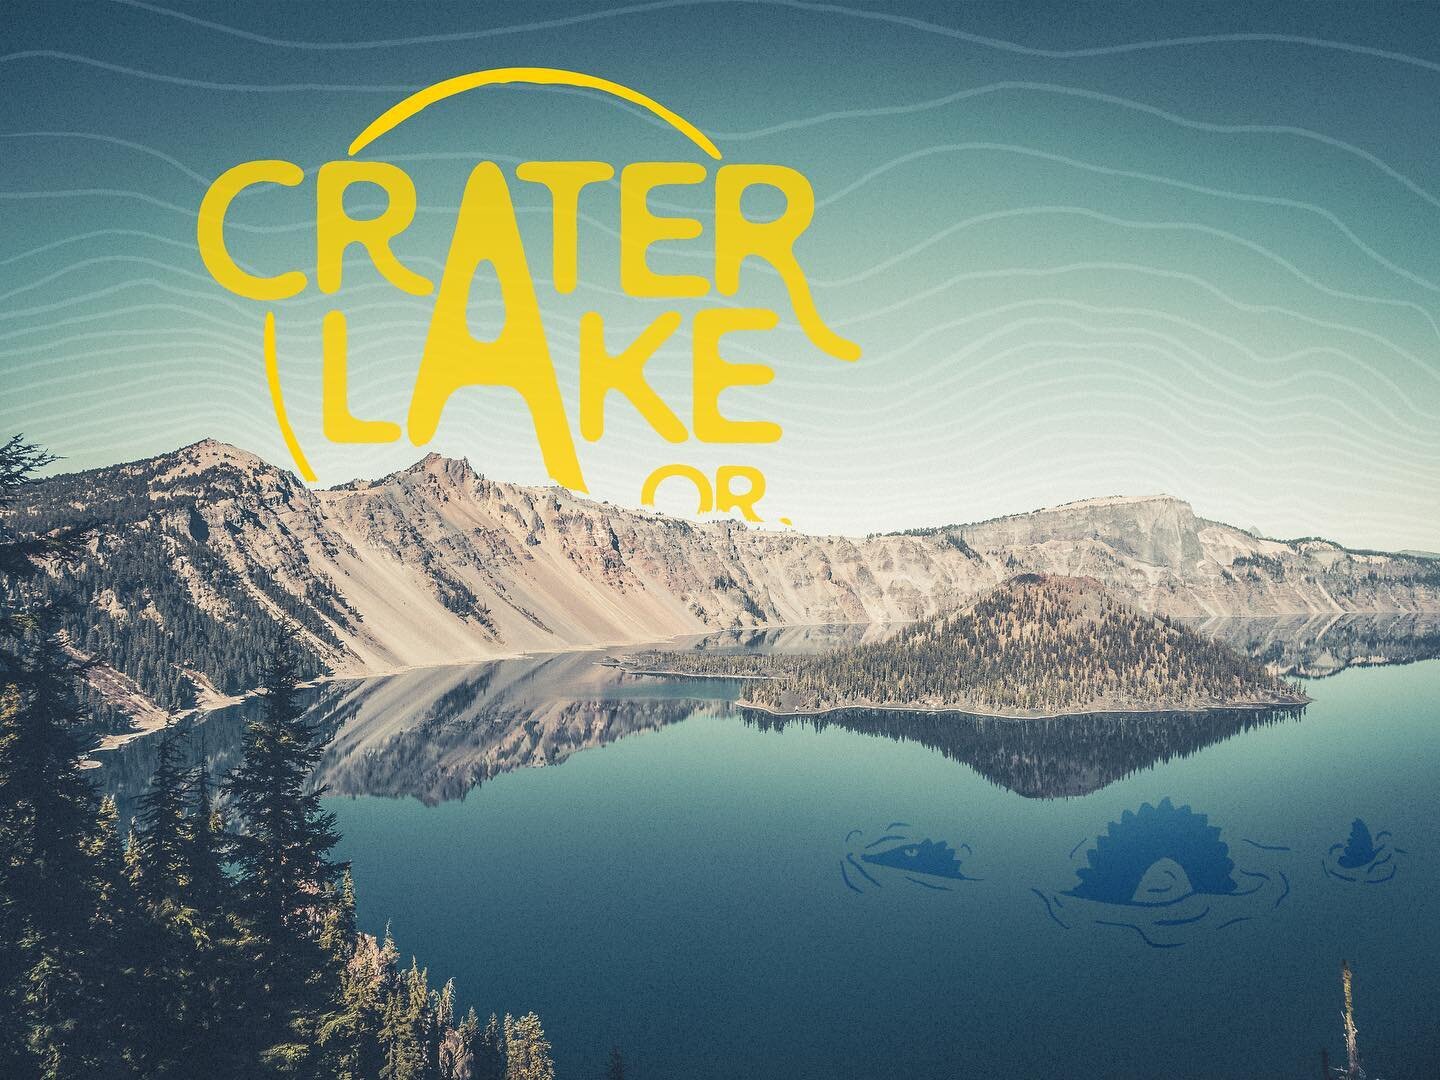 We&rsquo;ve got some things in the works and lurking in the water...so be on the lookout! In the mean time here is the final stop on the virtual road trip - Crater Lake, Oregon
-
-
-
-
-
#oregon #craterlake #refection #lochness #lake #camping #roadtr